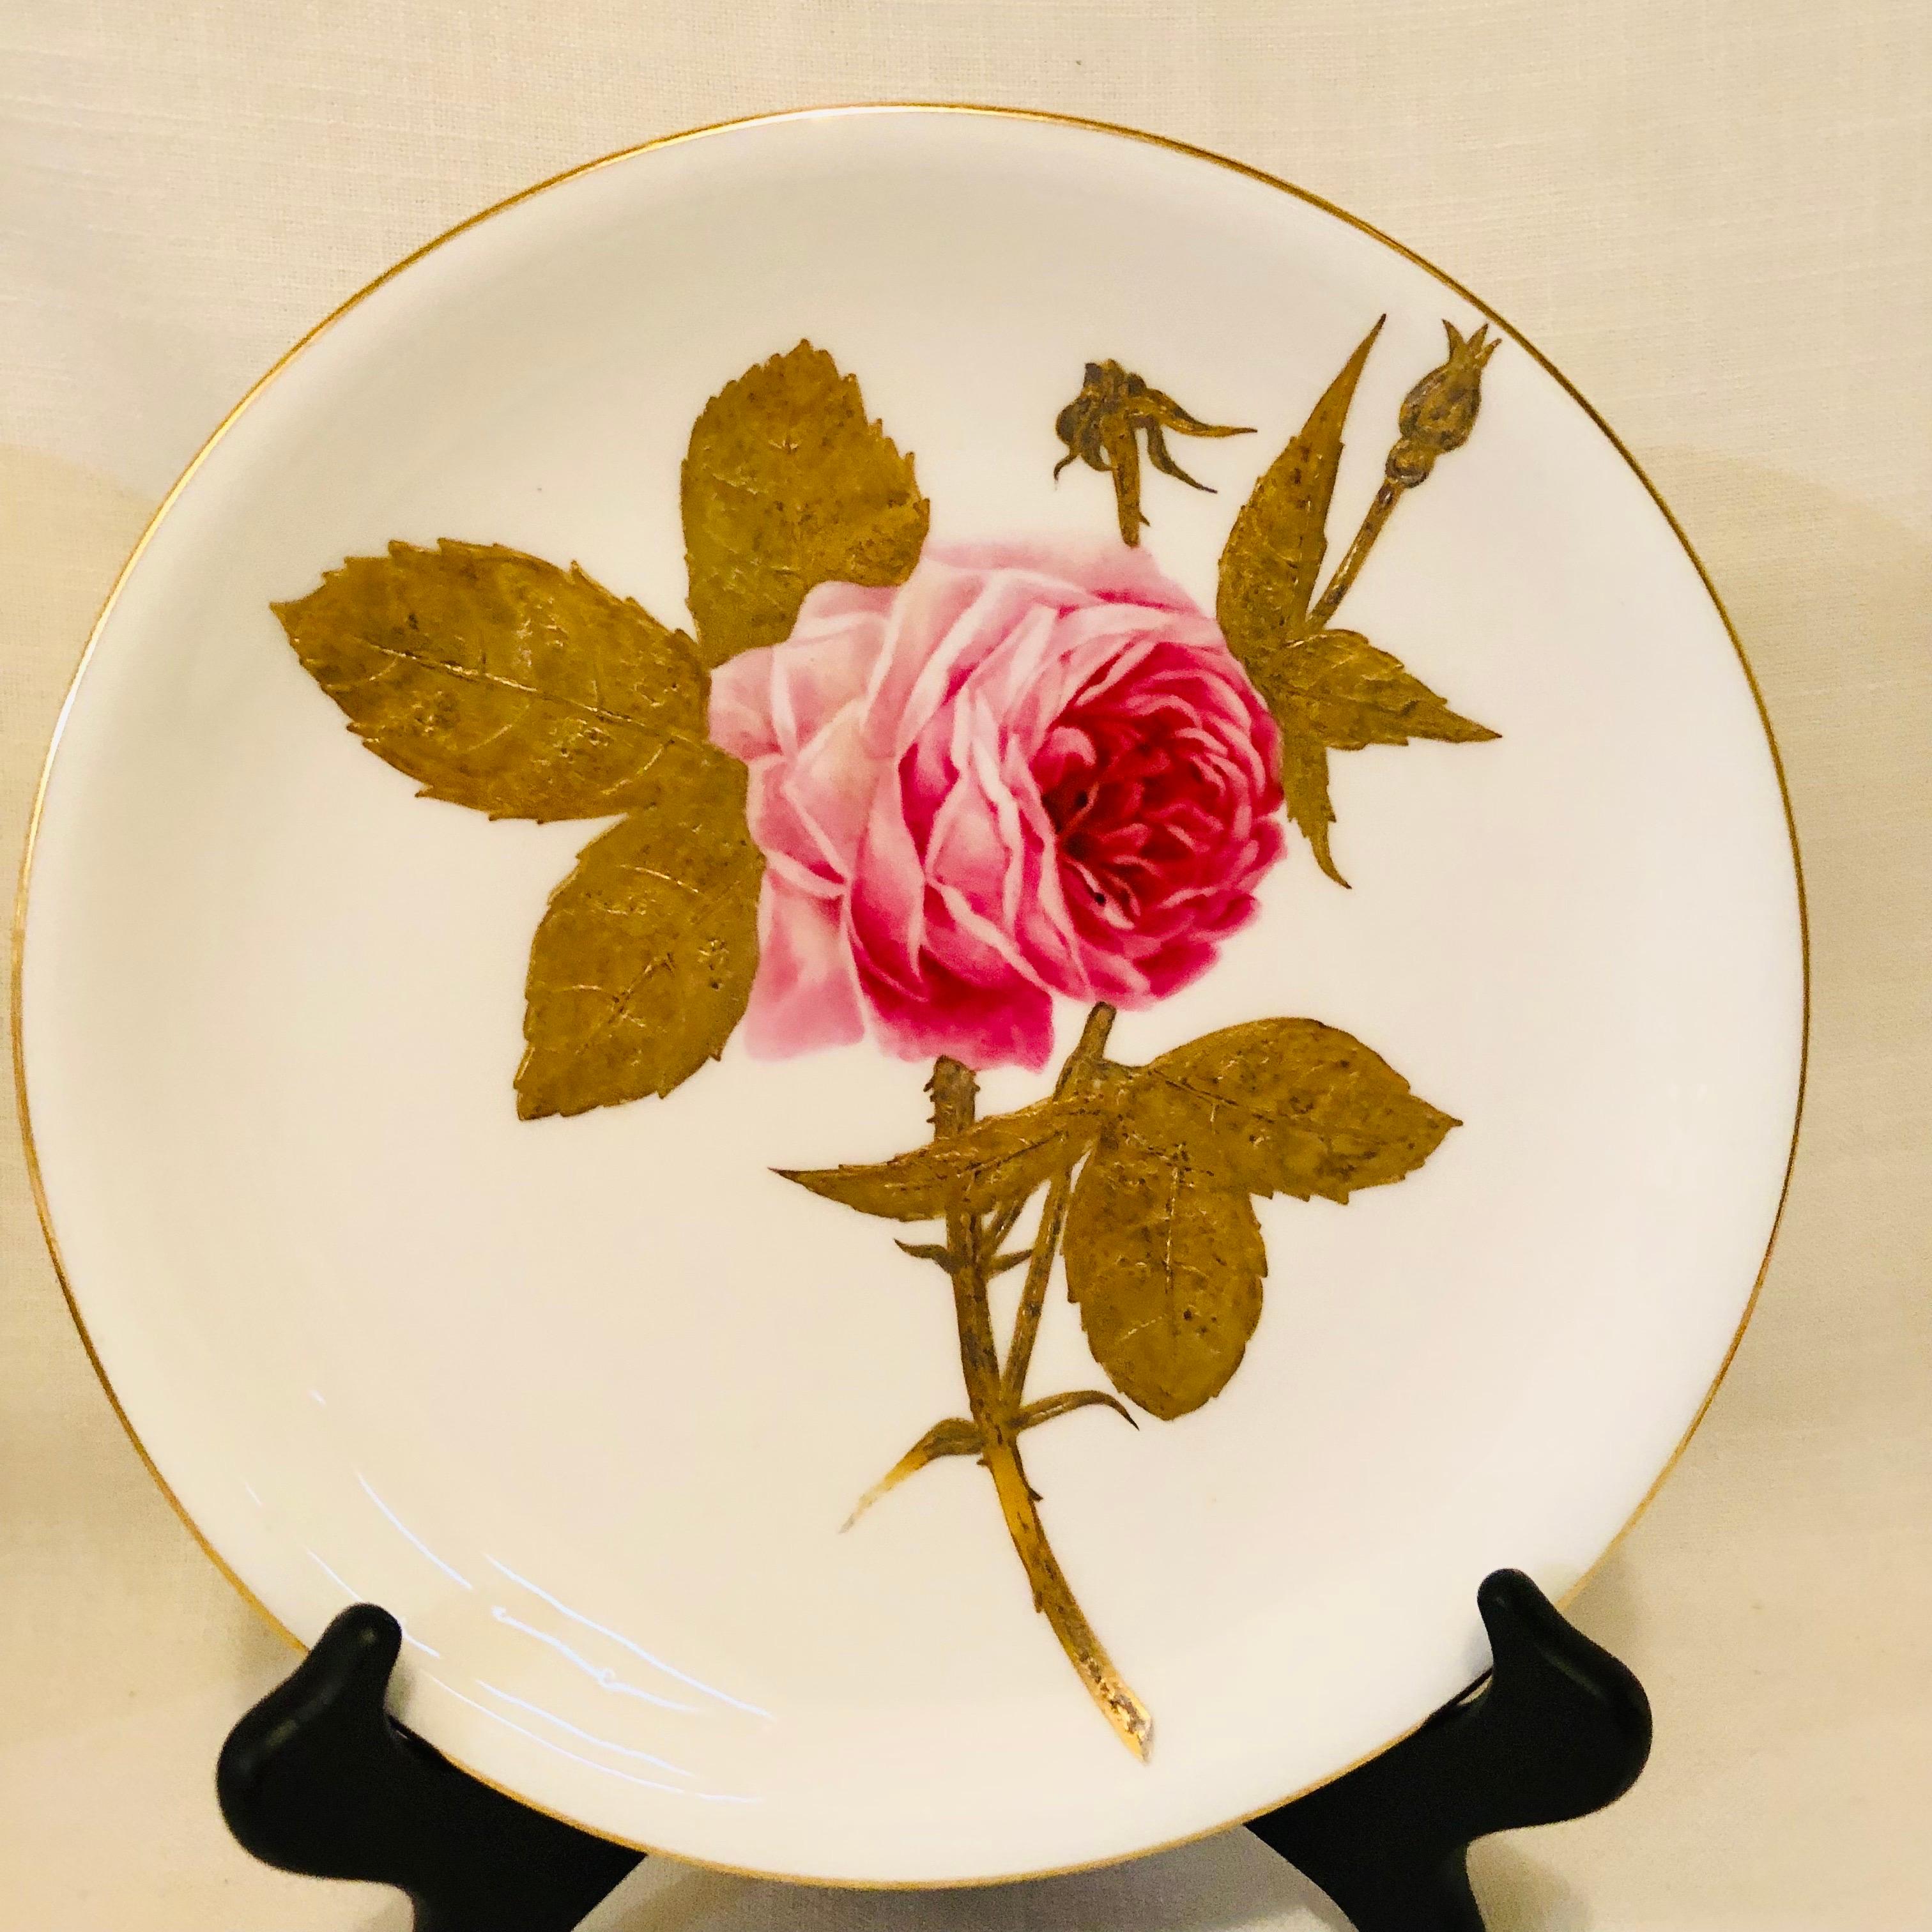 Minton Plates Each Painted With a Different Rose With Gold and Platinum Accents 11